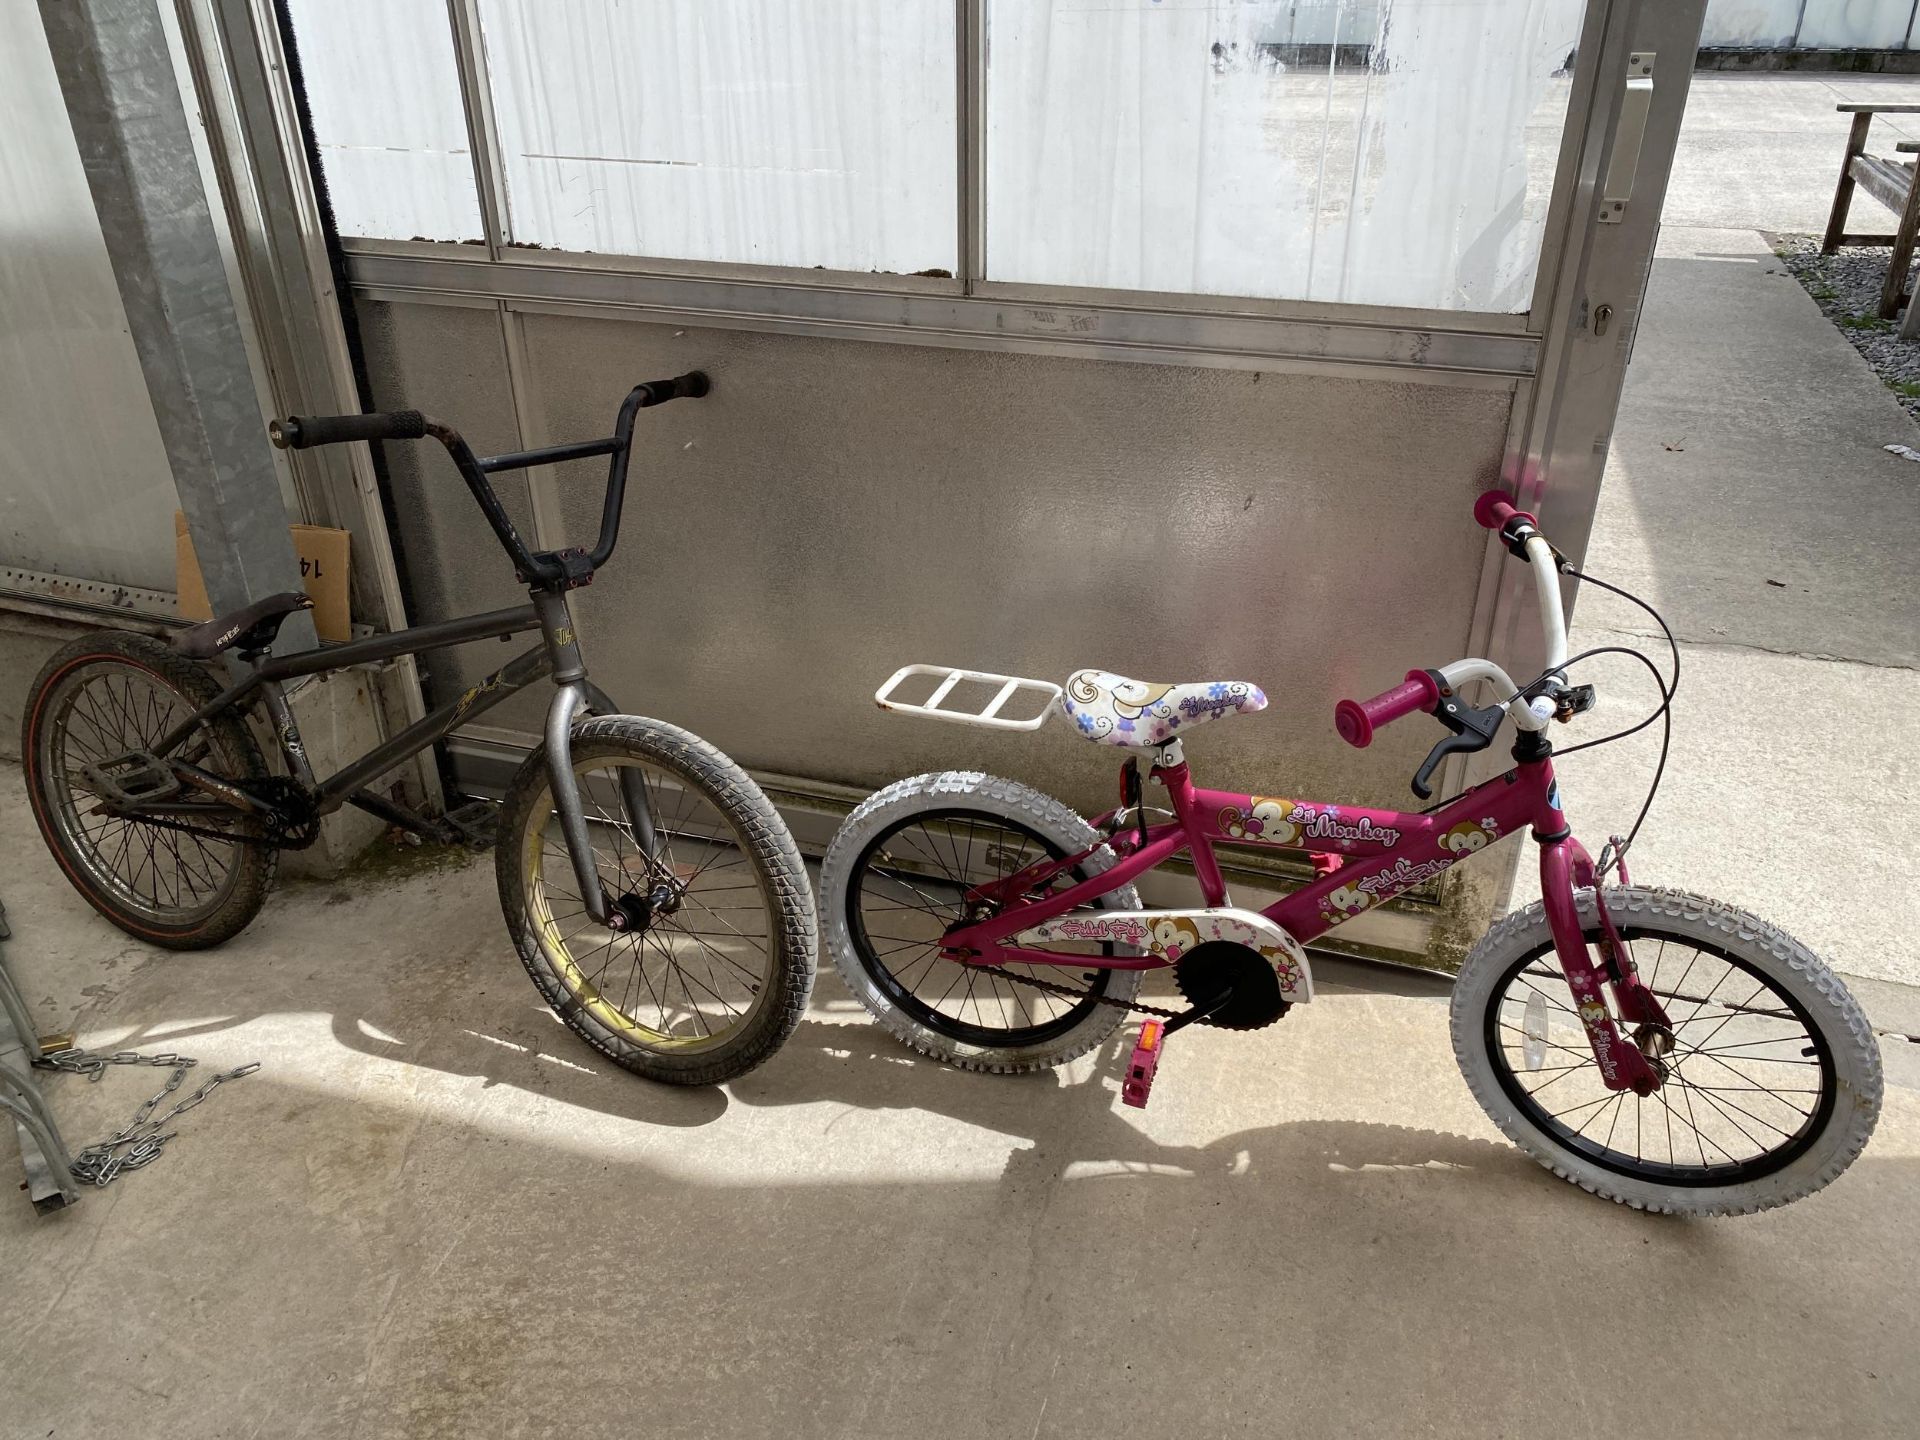 TWO CHILDRENS BIKES, A BMX AND A GIRLS PEDAL PETS BIKE